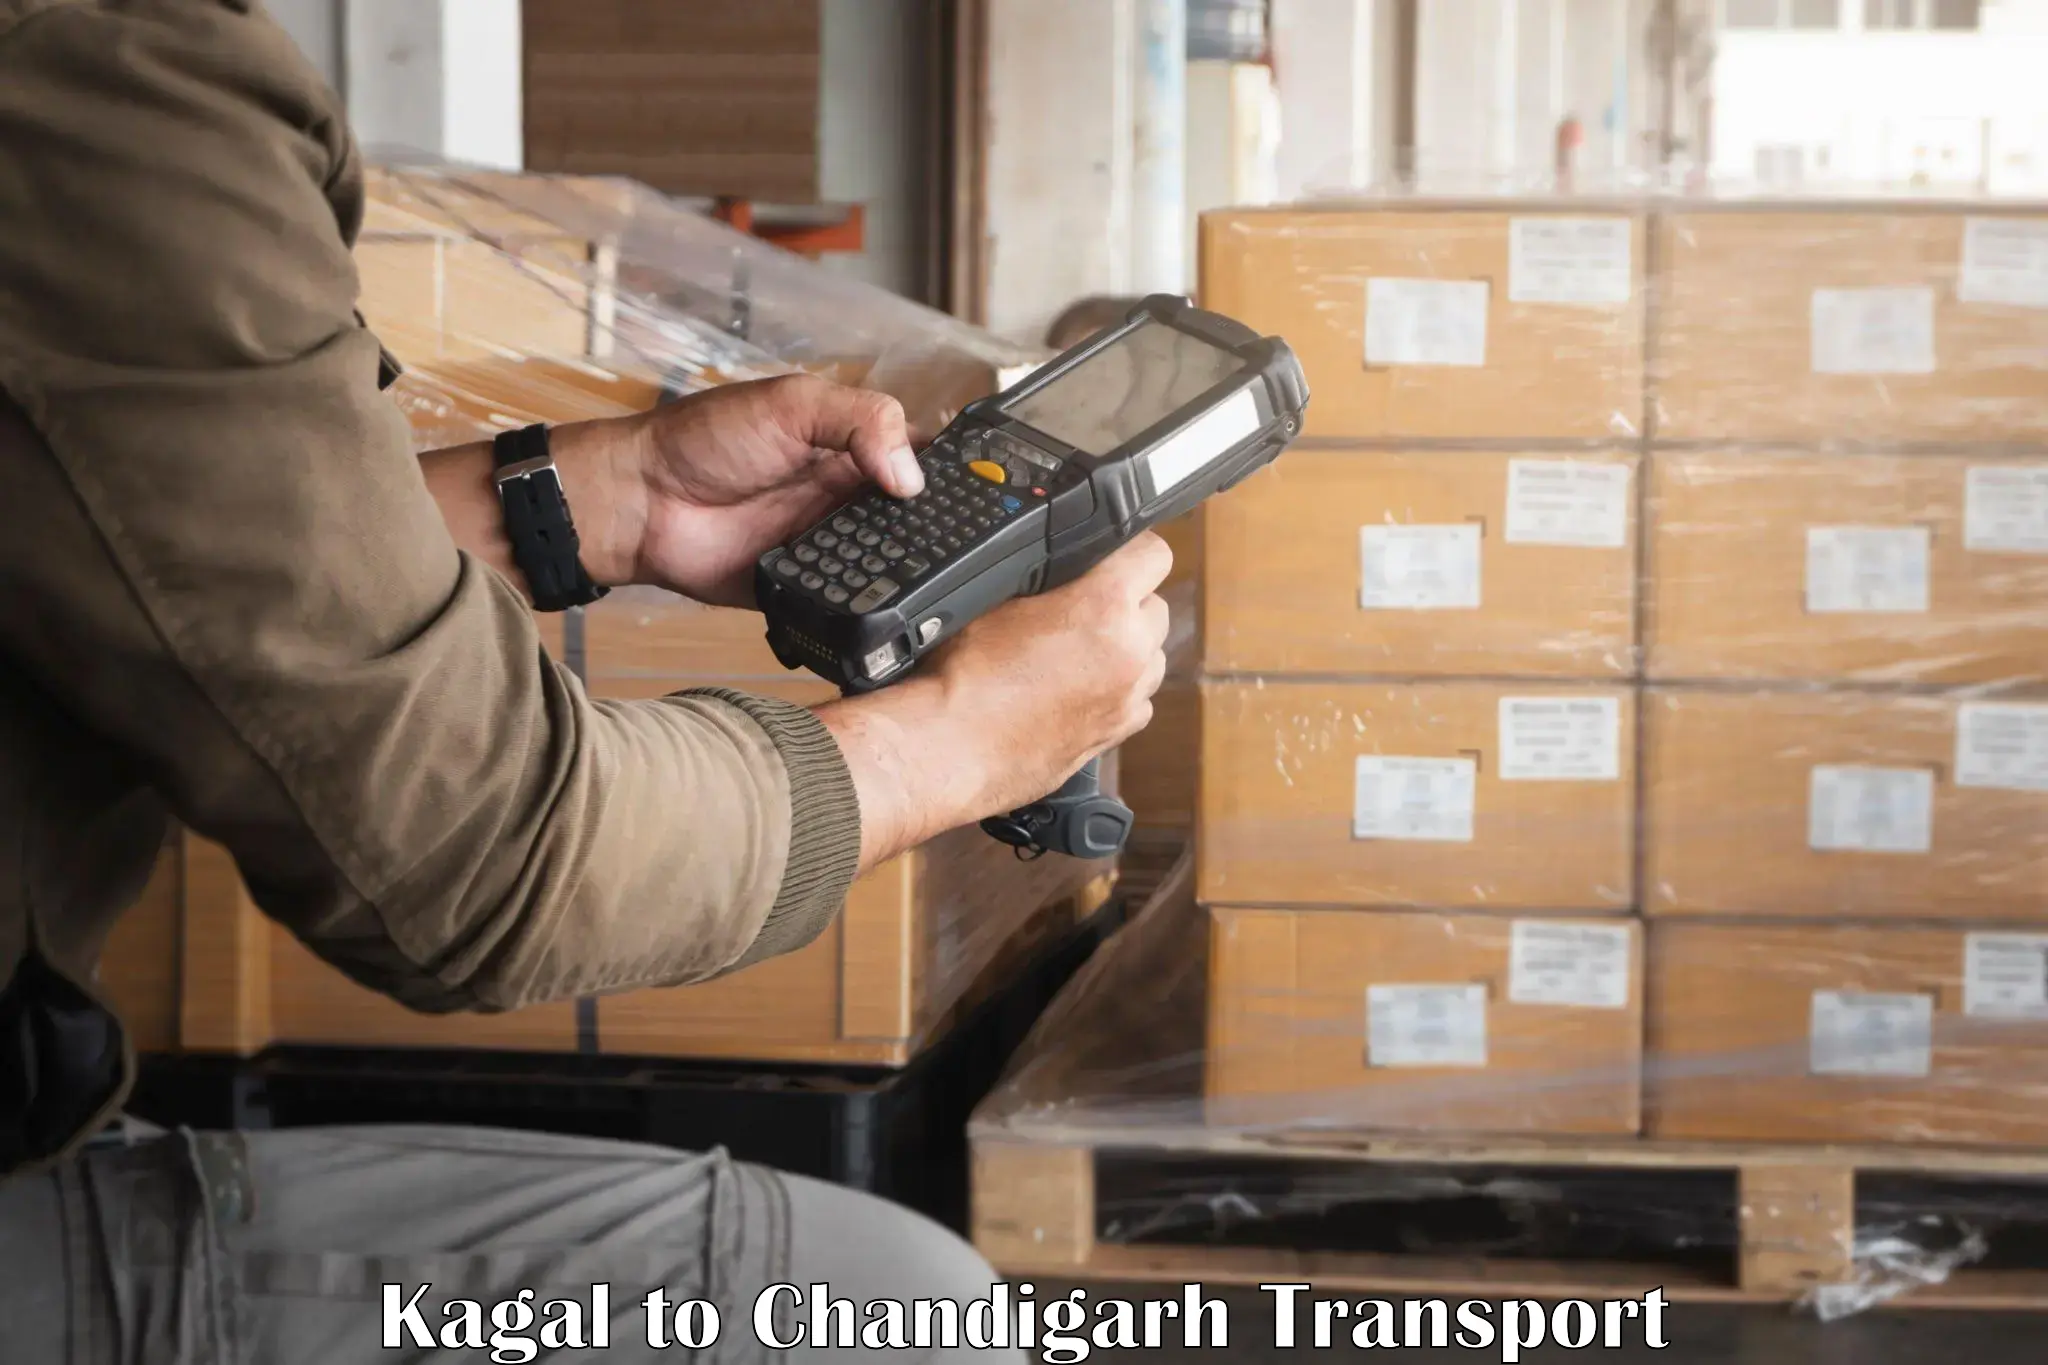 Lorry transport service Kagal to Chandigarh